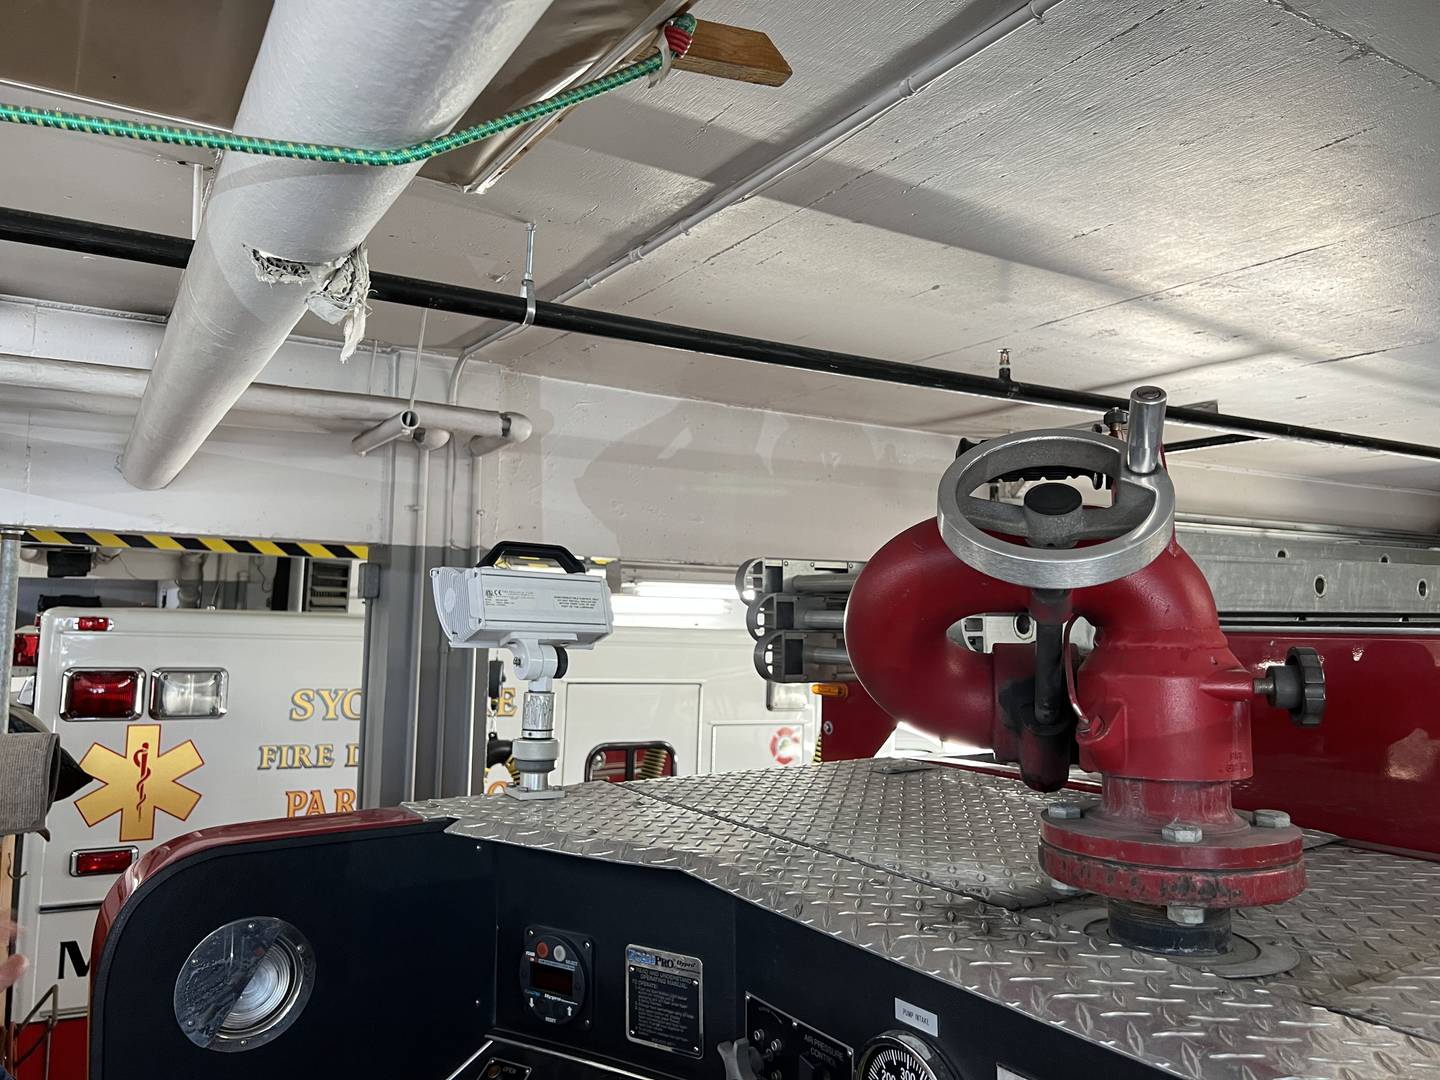 There are only a few inches of clearance between the top of fire engines docked at Sycamore Fire Station 1 and the pipes that run overhead. Picture taken June 9, 2023.